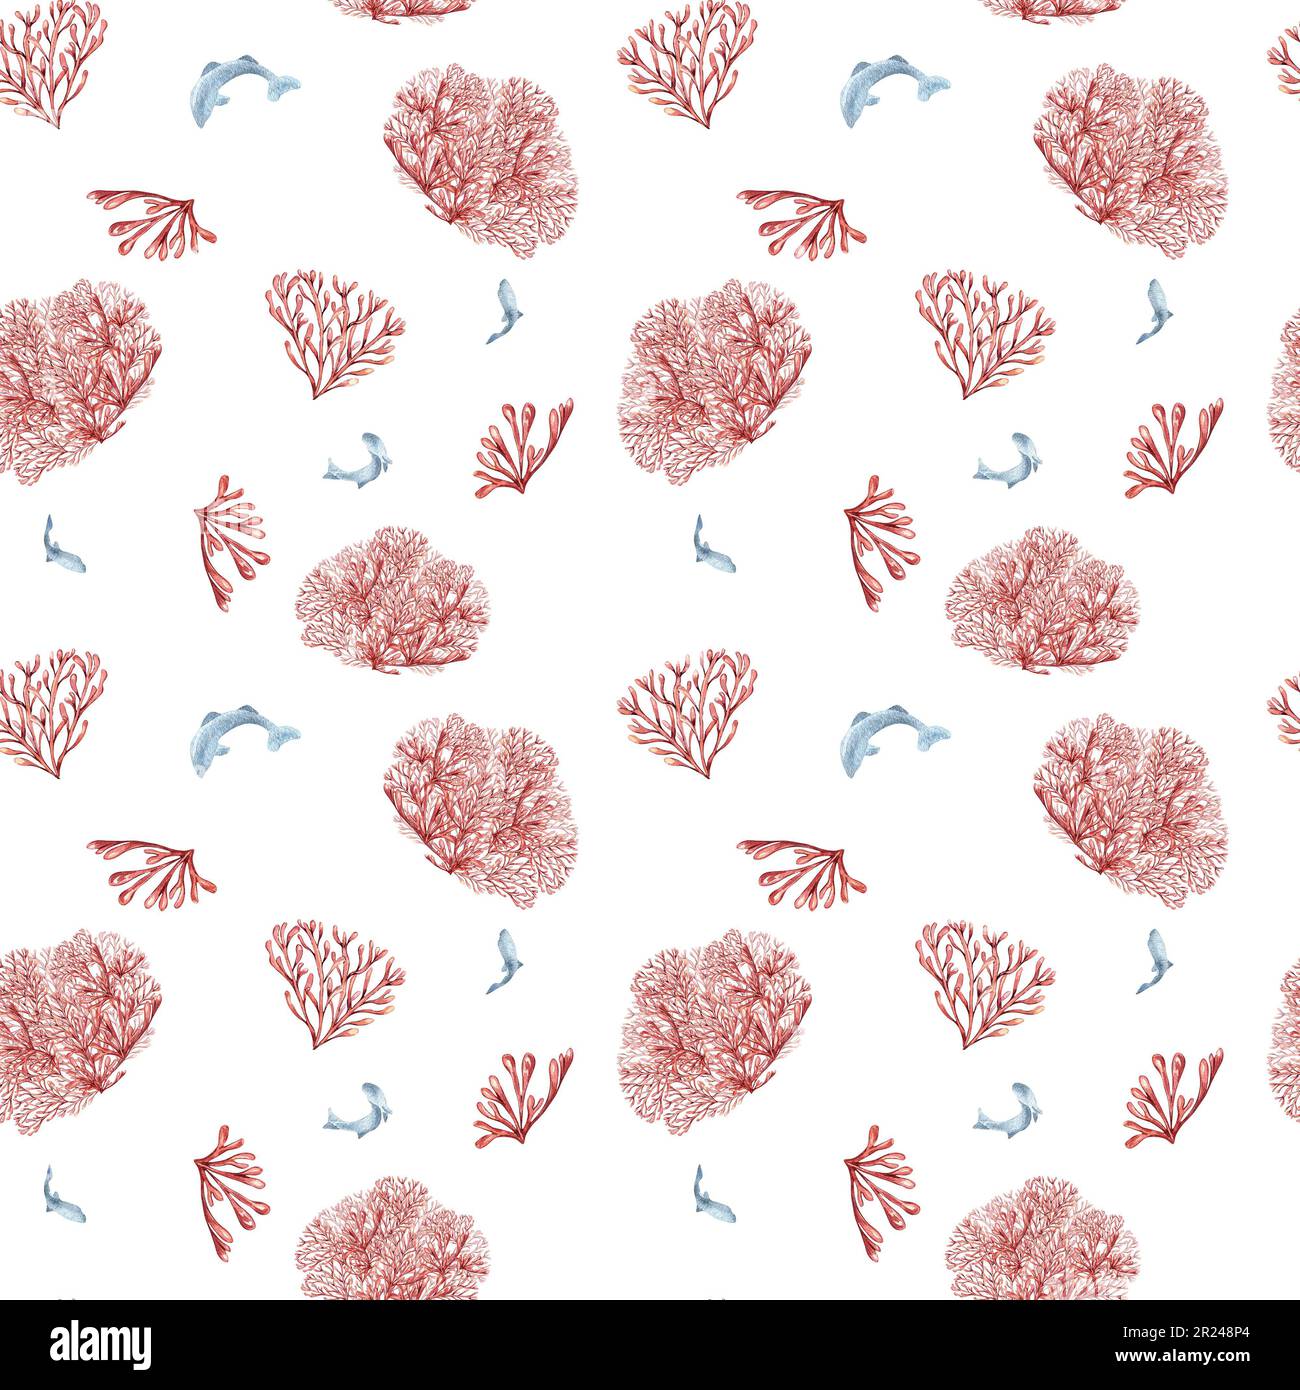 Seamless pattern of sea plants, coral watercolor isolated on white background. Pink agar agar seaweed and fish hand drawn. Design element for package, Stock Photo